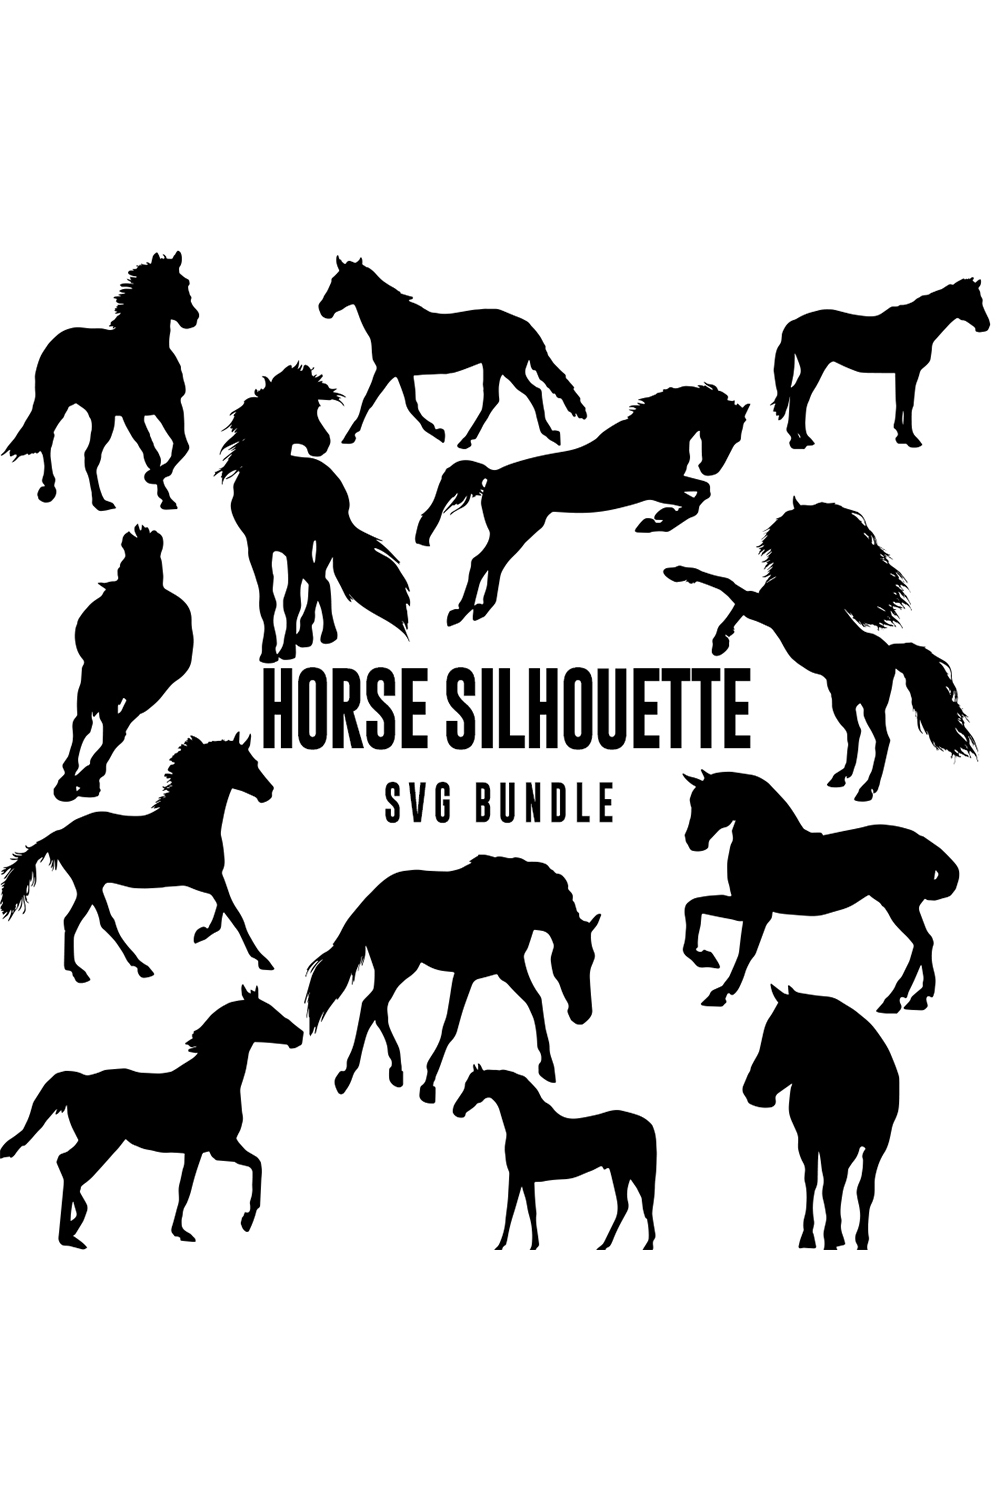 Set of silhouettes of horses in different poses.